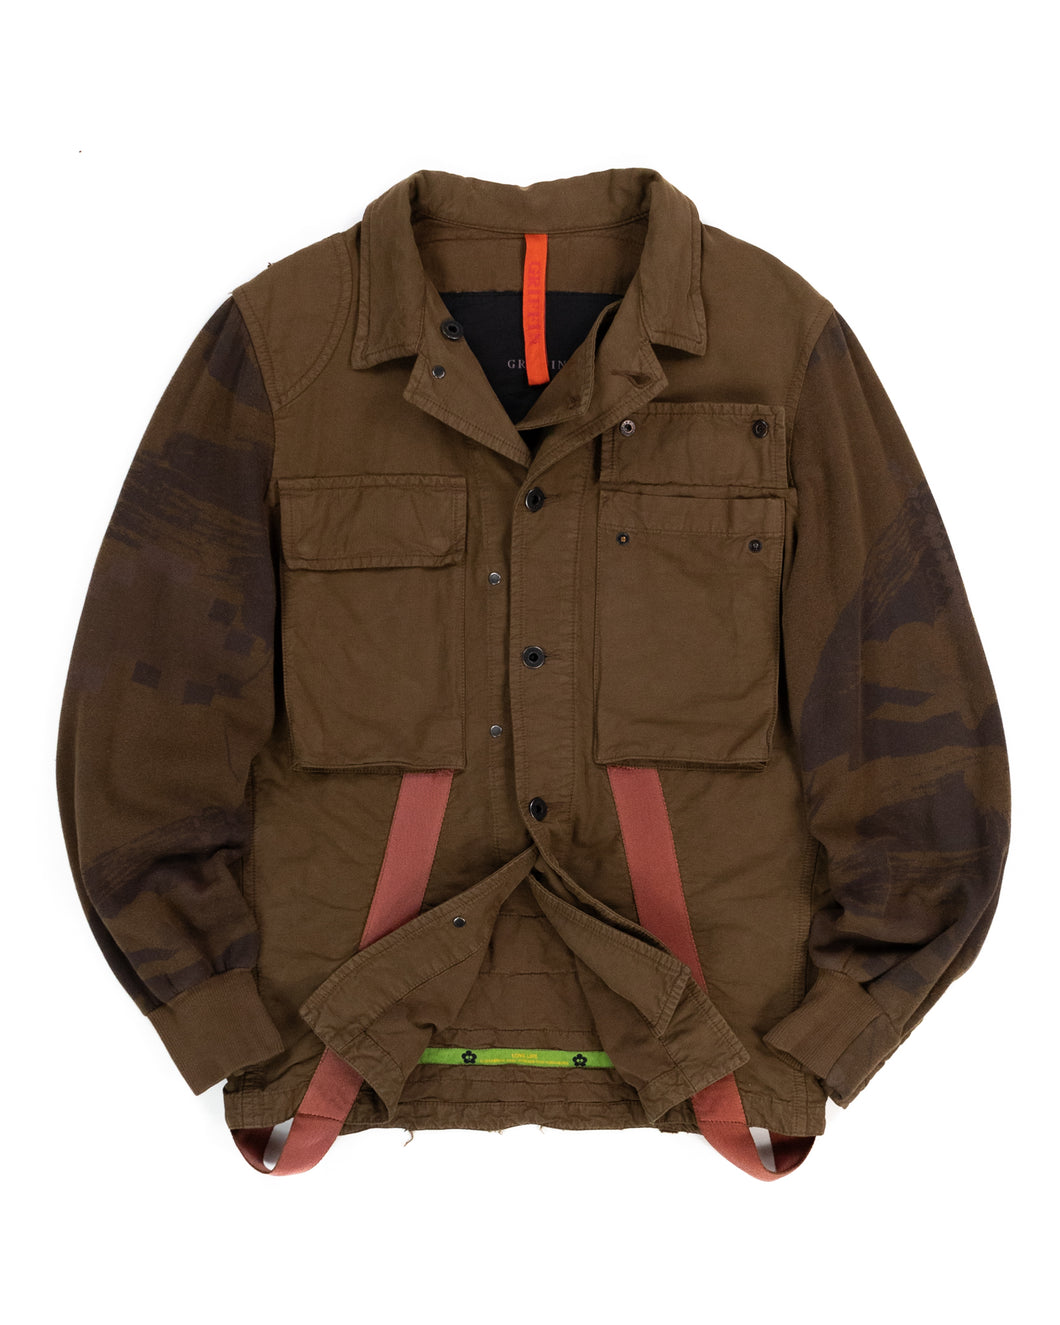 GRIFFIN Laser Cut Military Jacket (Early 2000's)(M)